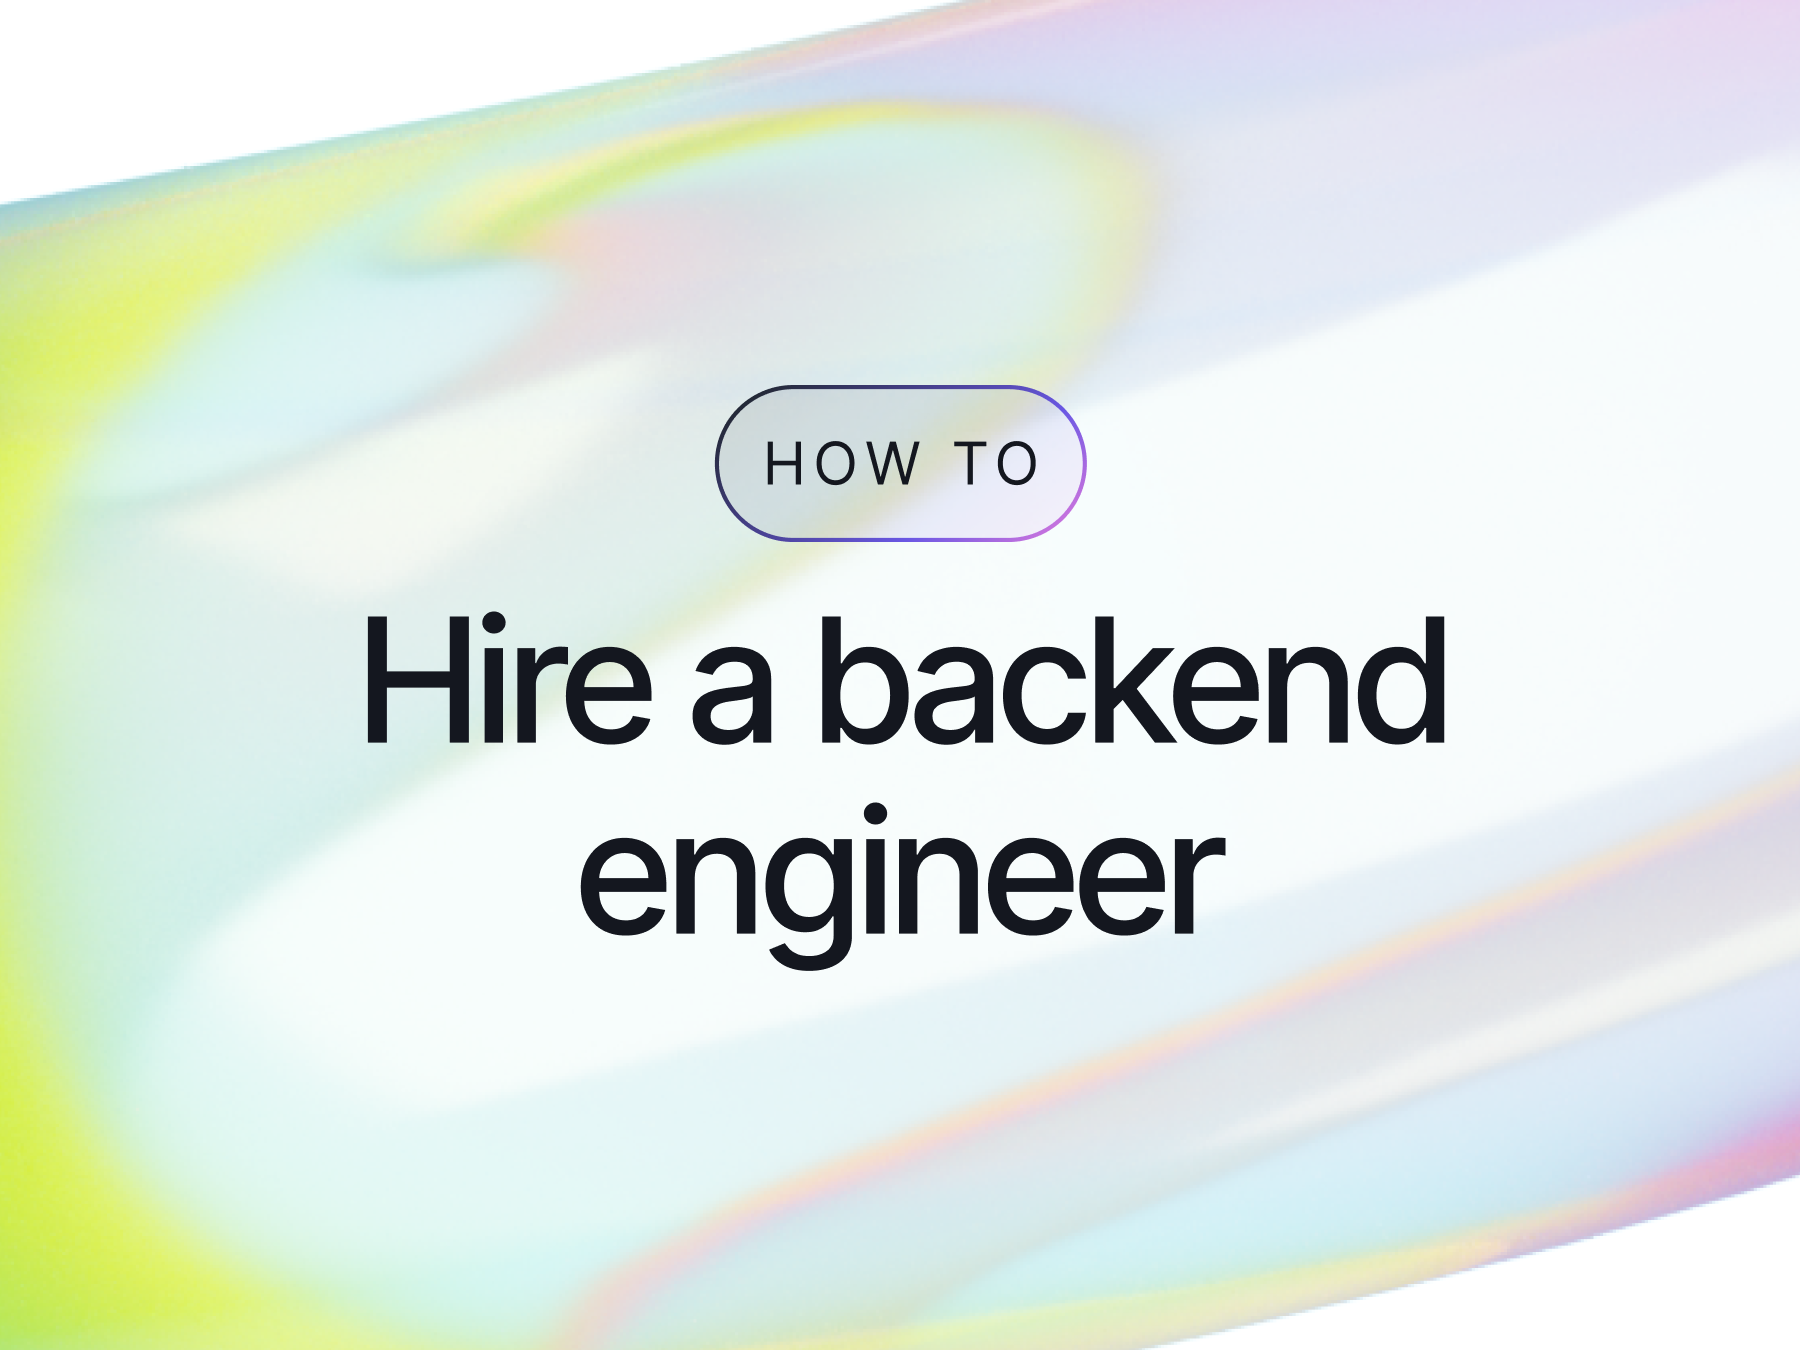 How to Hire a Backend Engineer